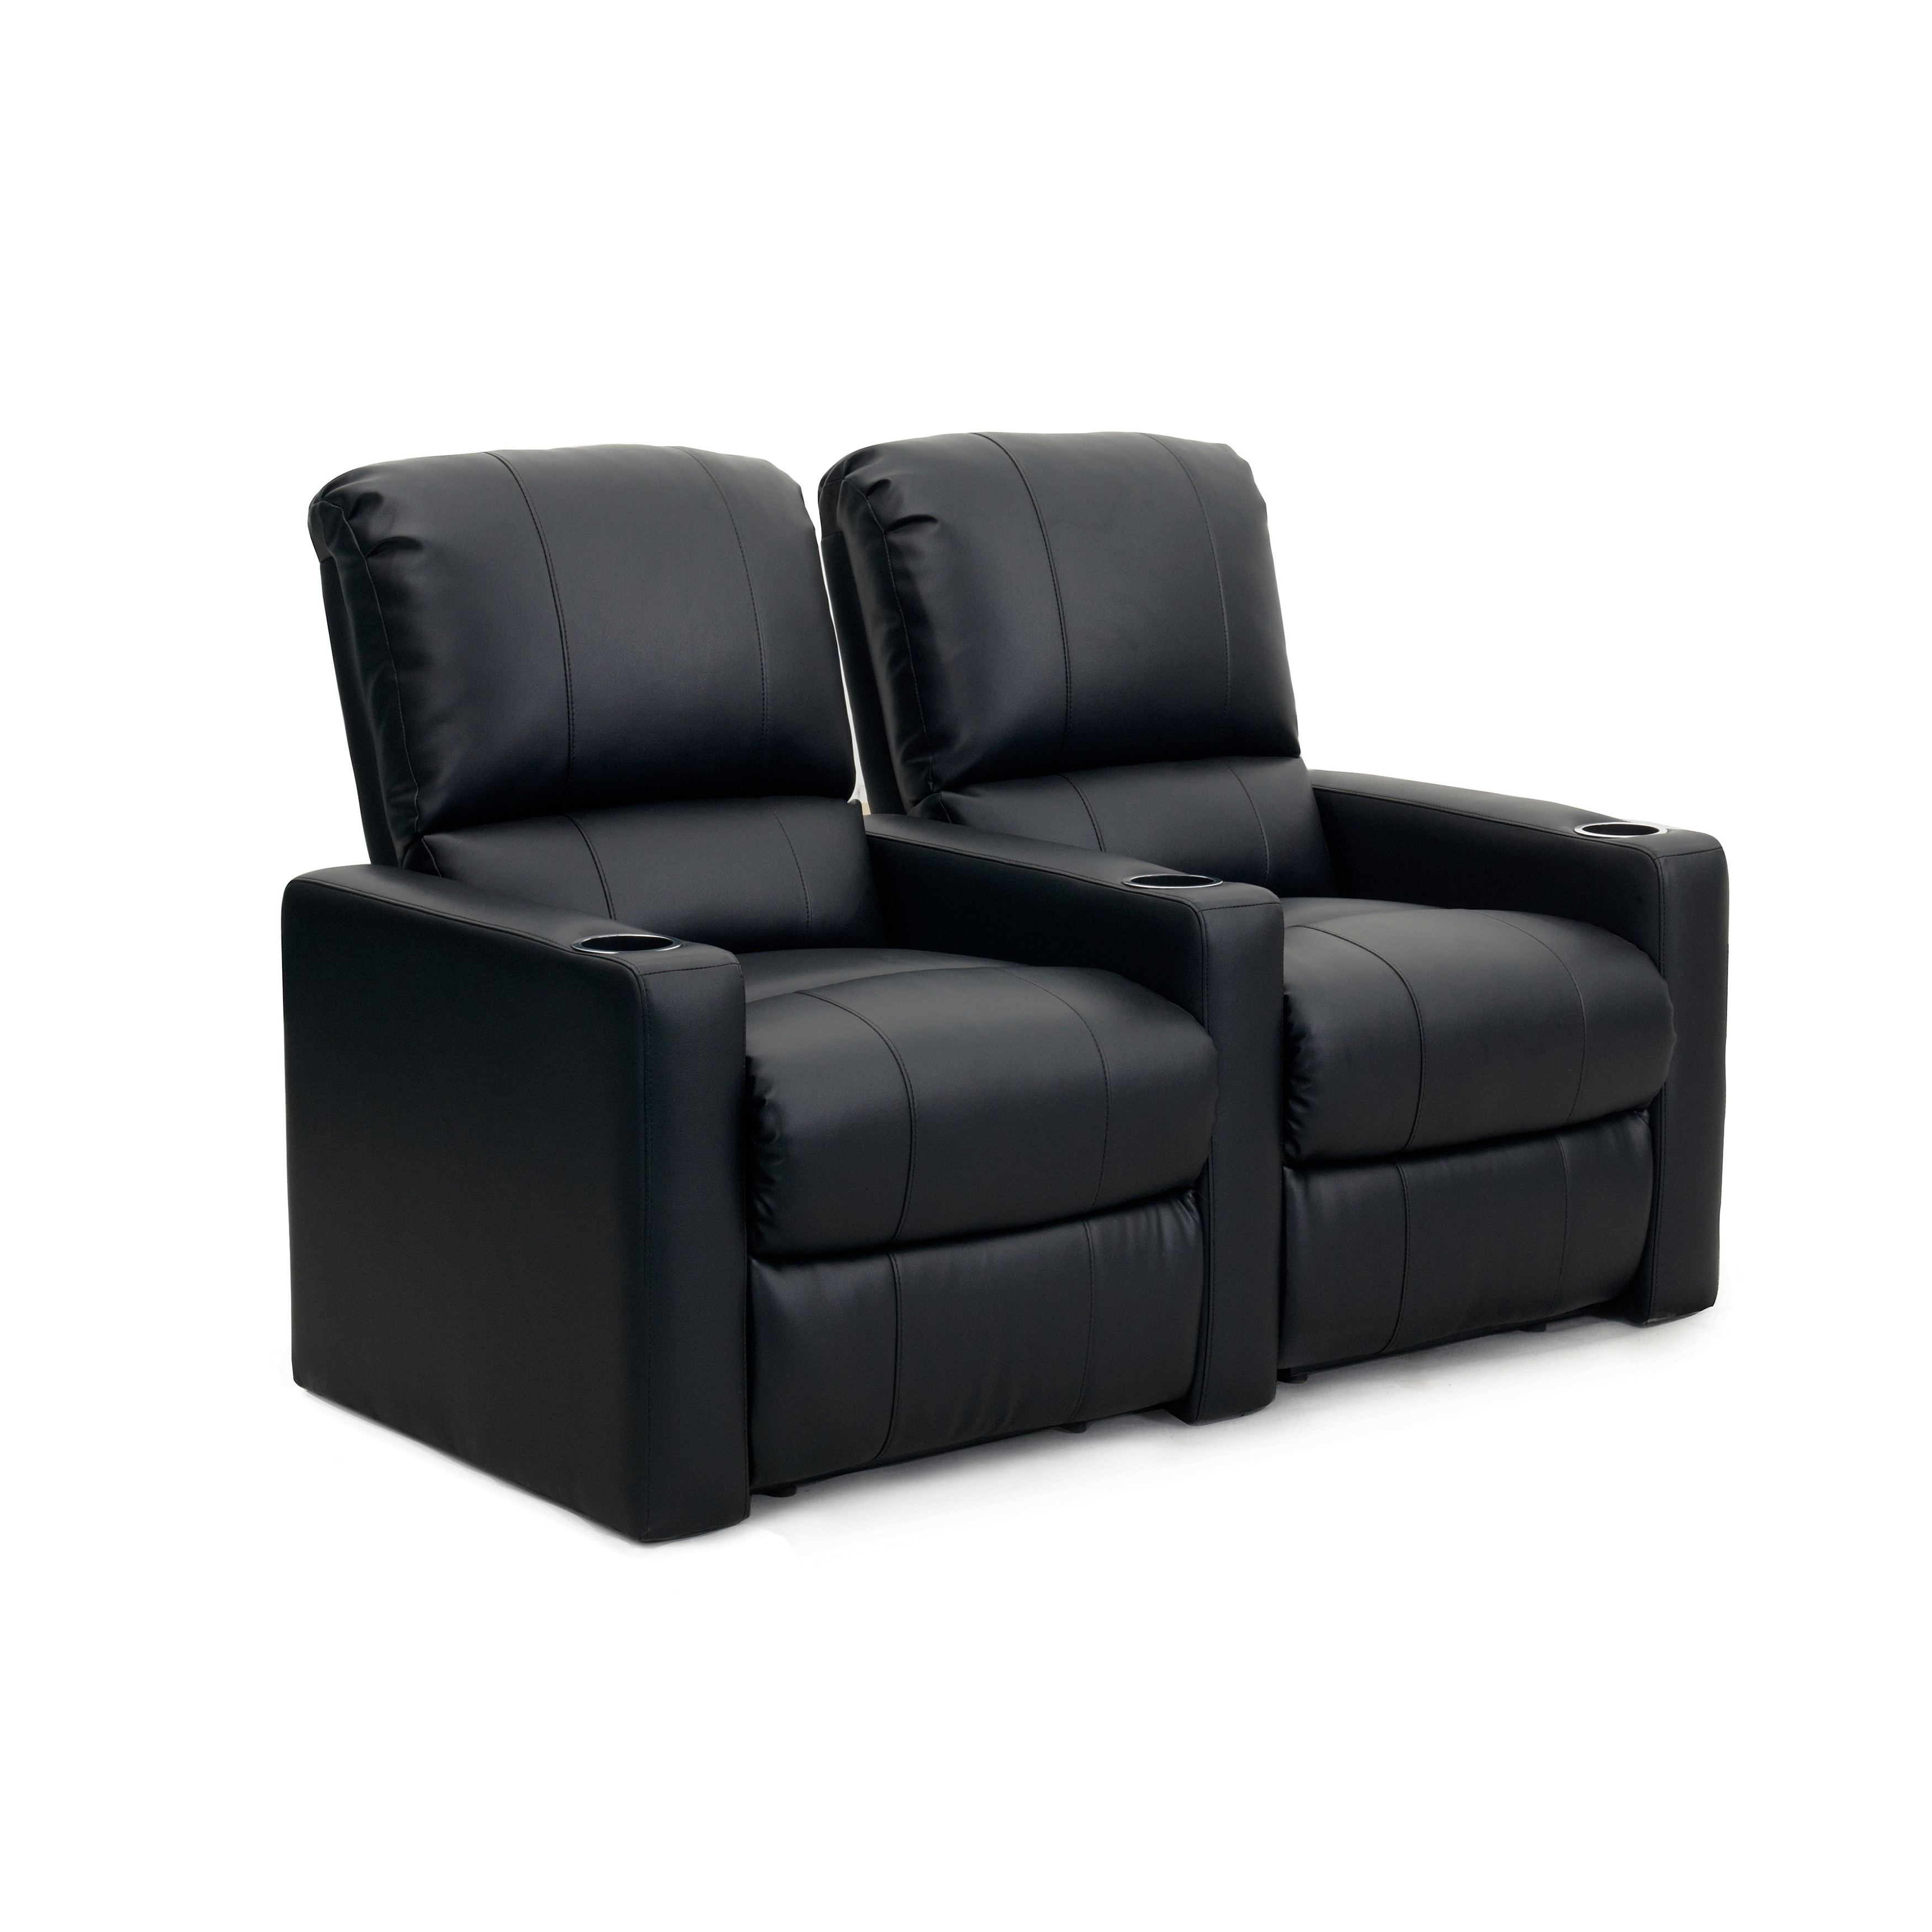 octane charger xs300 manual leather home theater seating row of 2